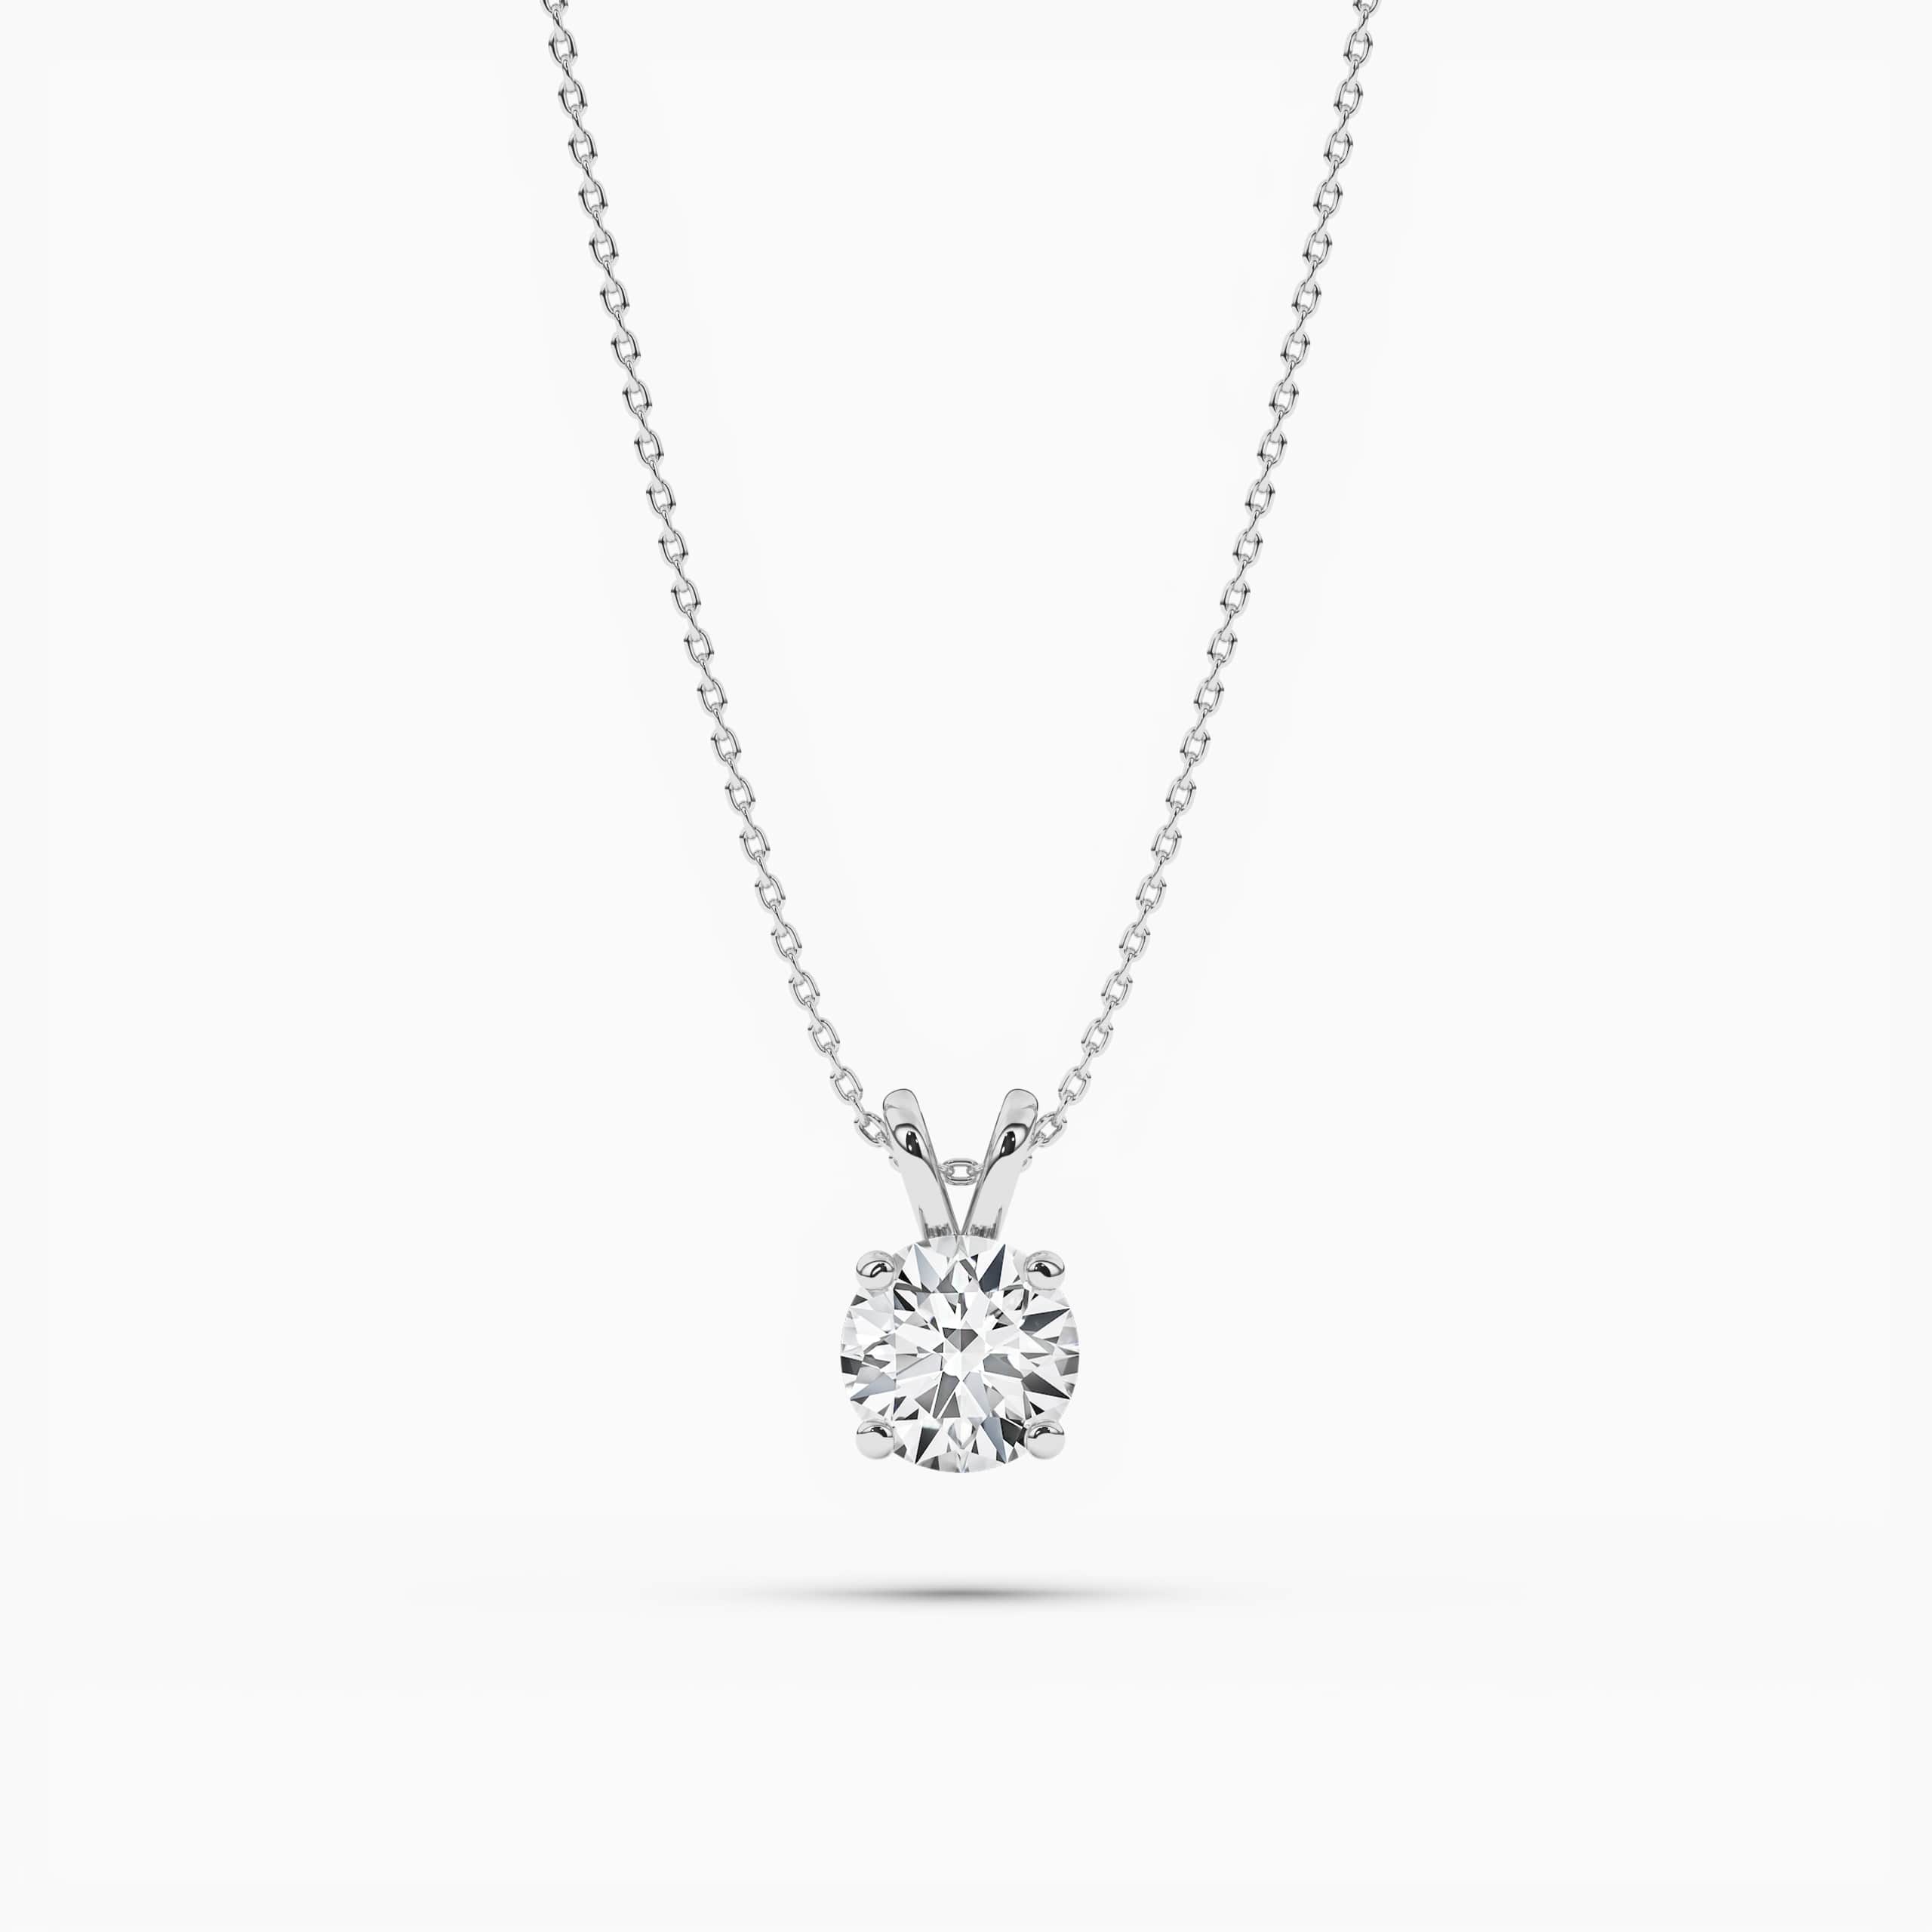 Round Cut Diamond Solitaire Pendant in White Gold with Chain